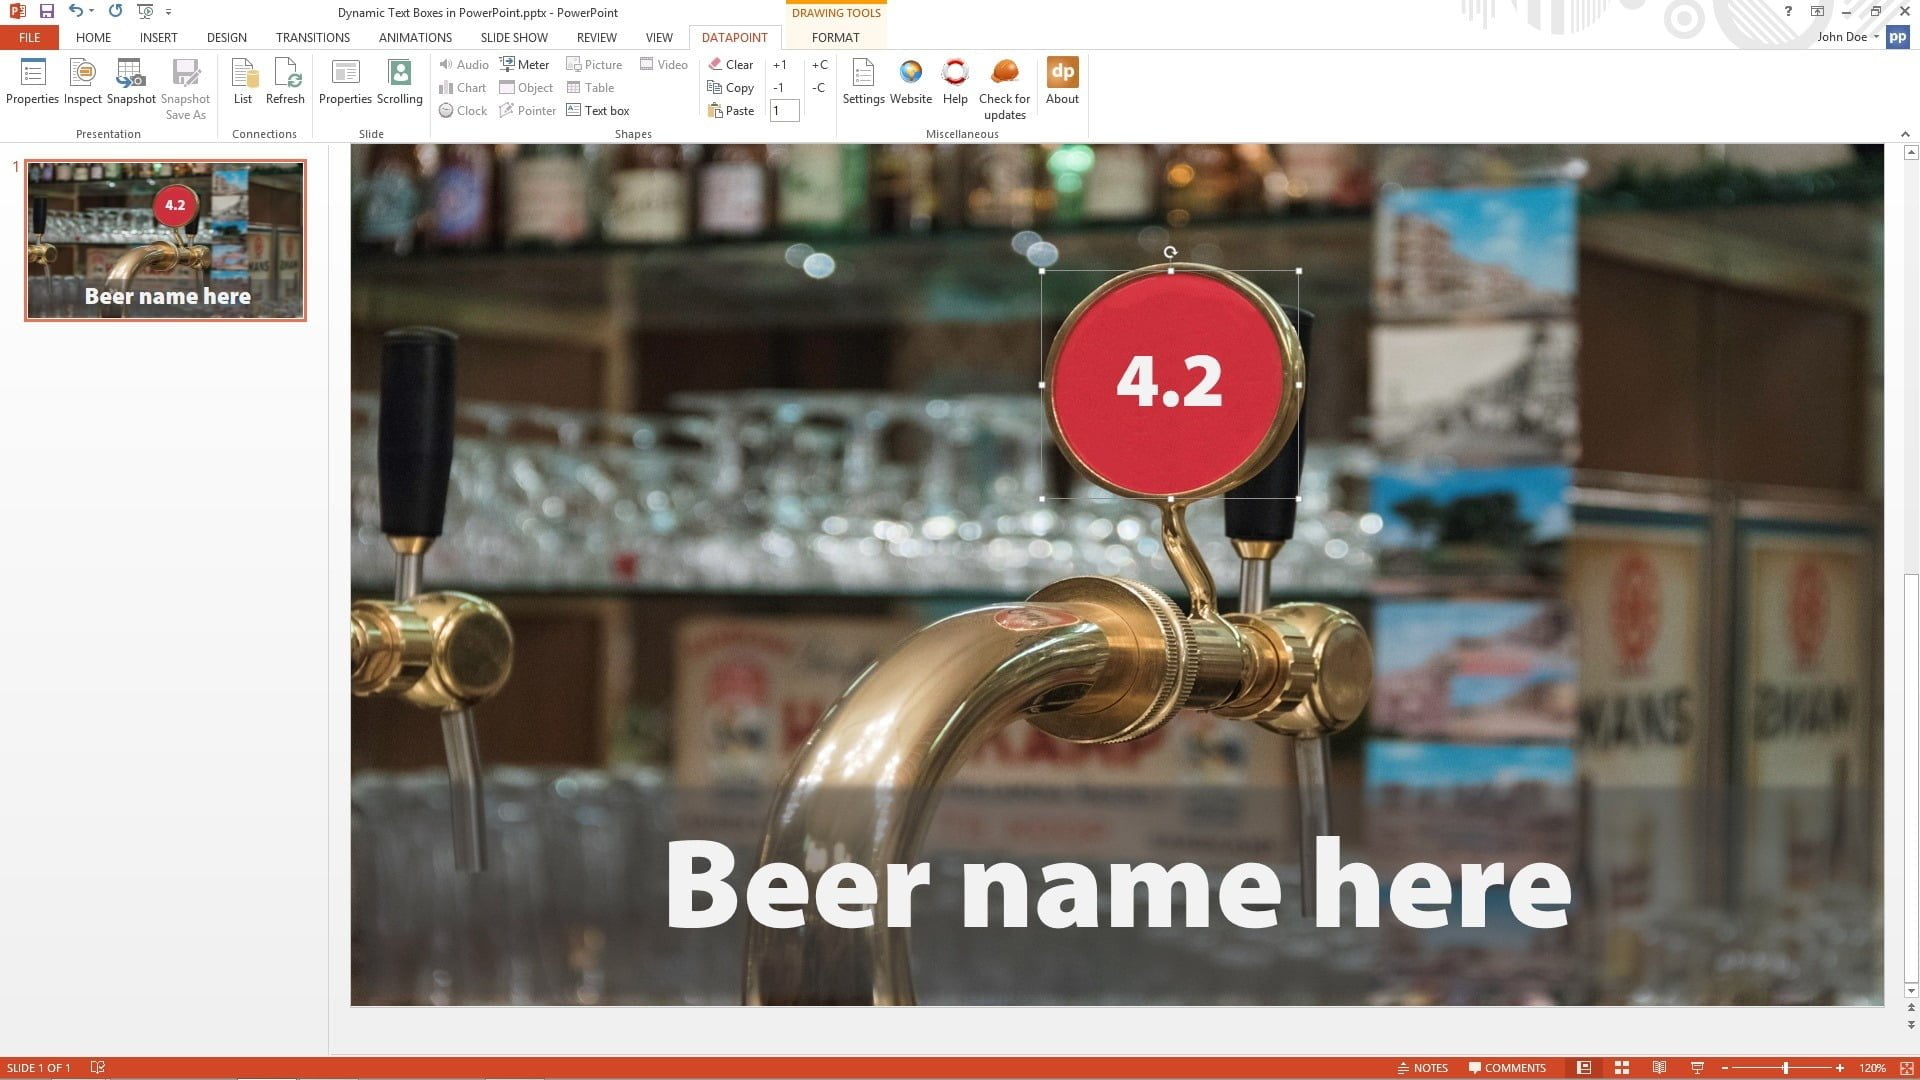 beer price dynamically linked to text box